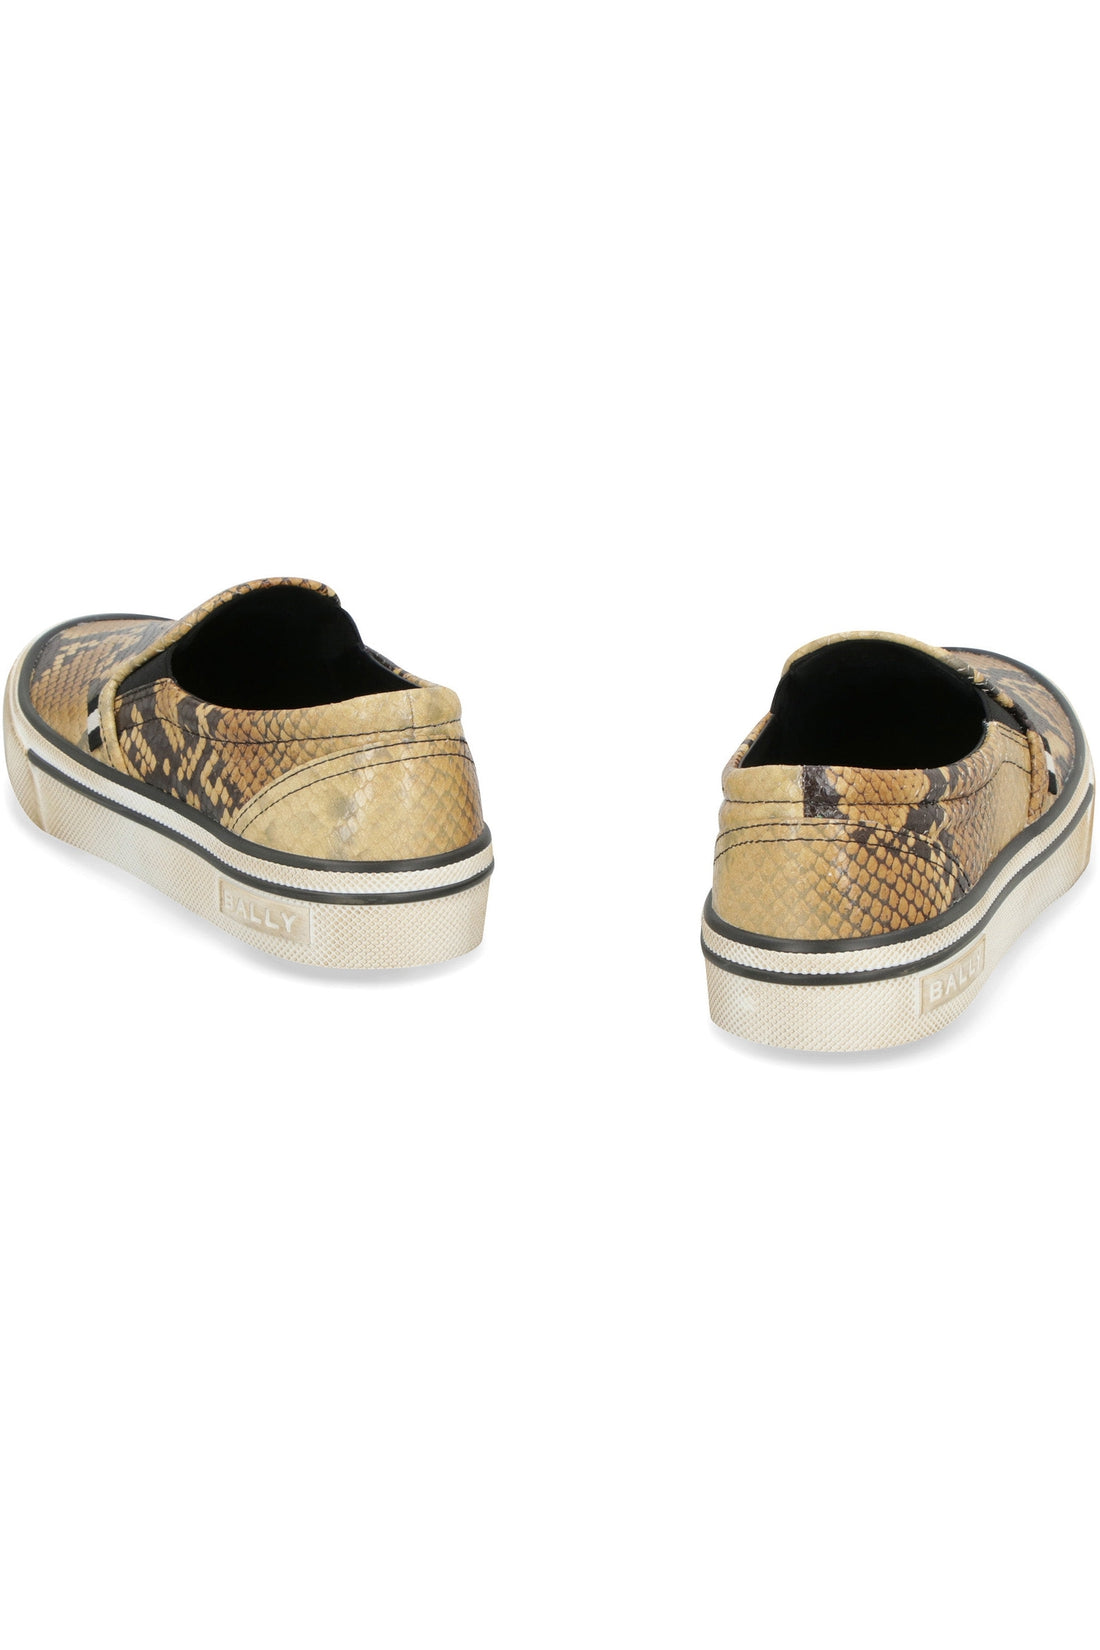 Bally-OUTLET-SALE-Santa Ana printed leather slip-on sneakers-ARCHIVIST